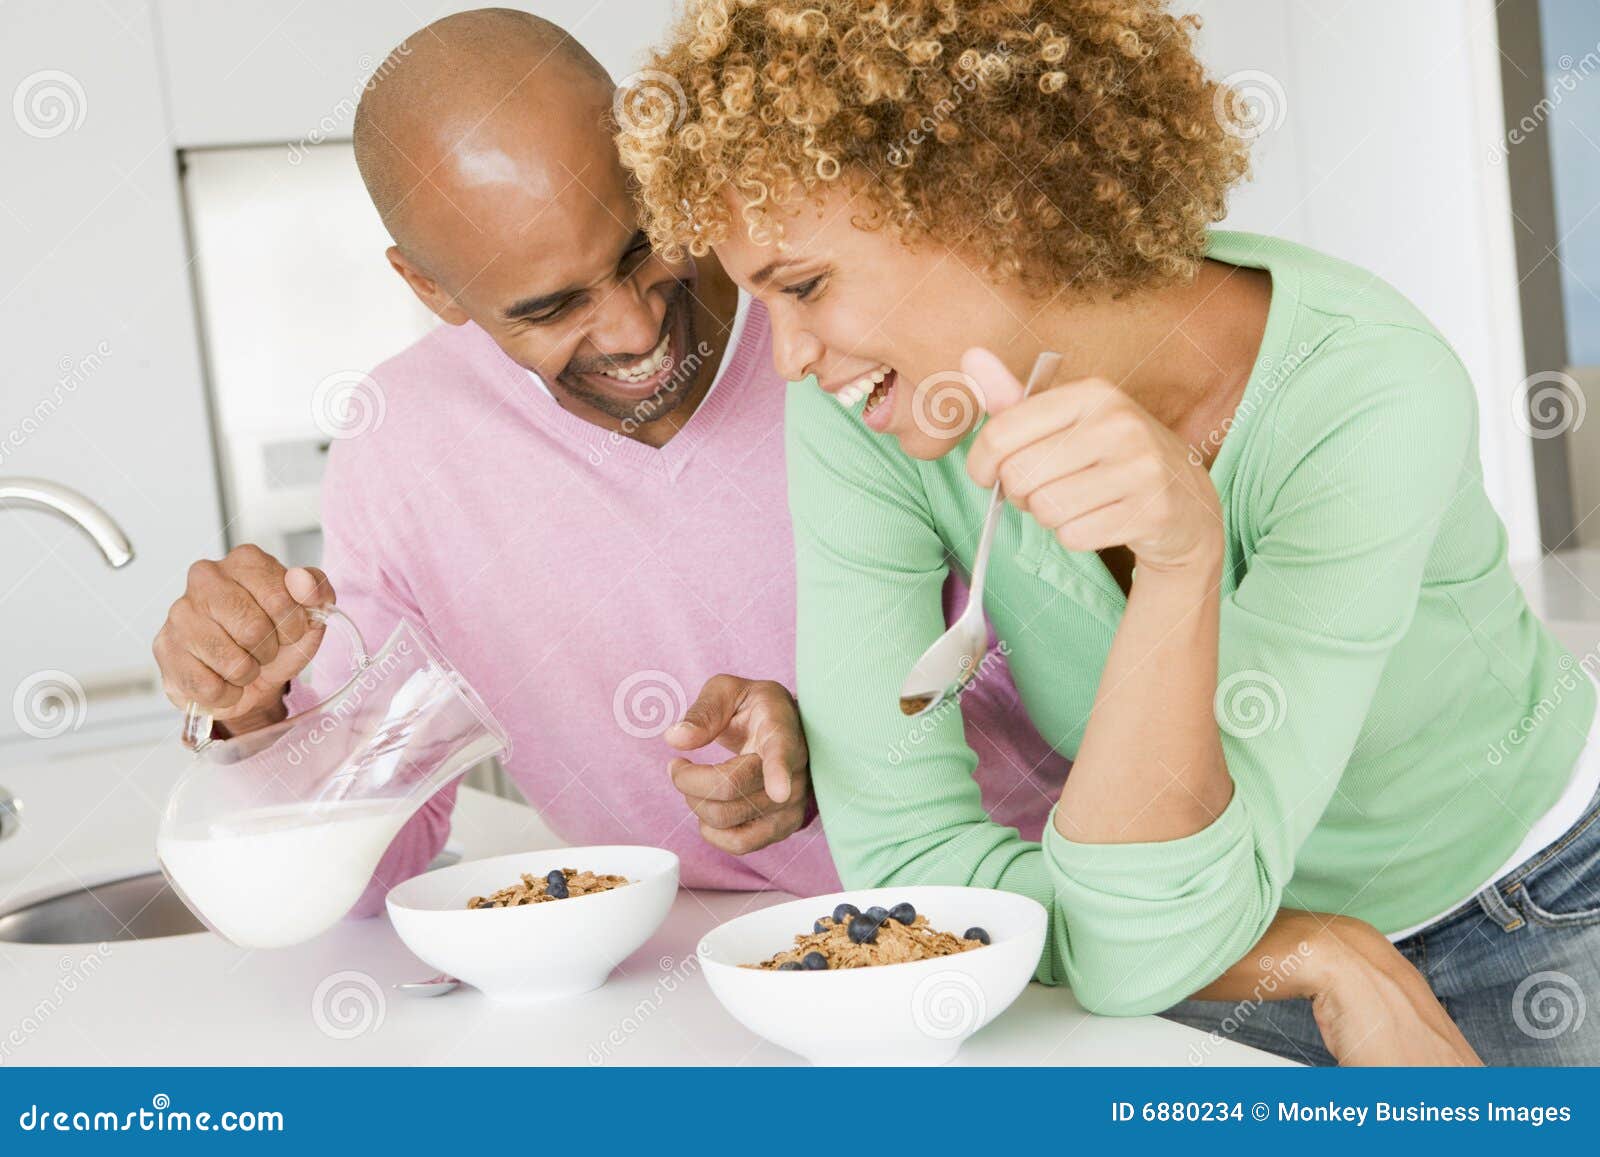 Husband And Wife Eating Breakfast Together Stock Images 